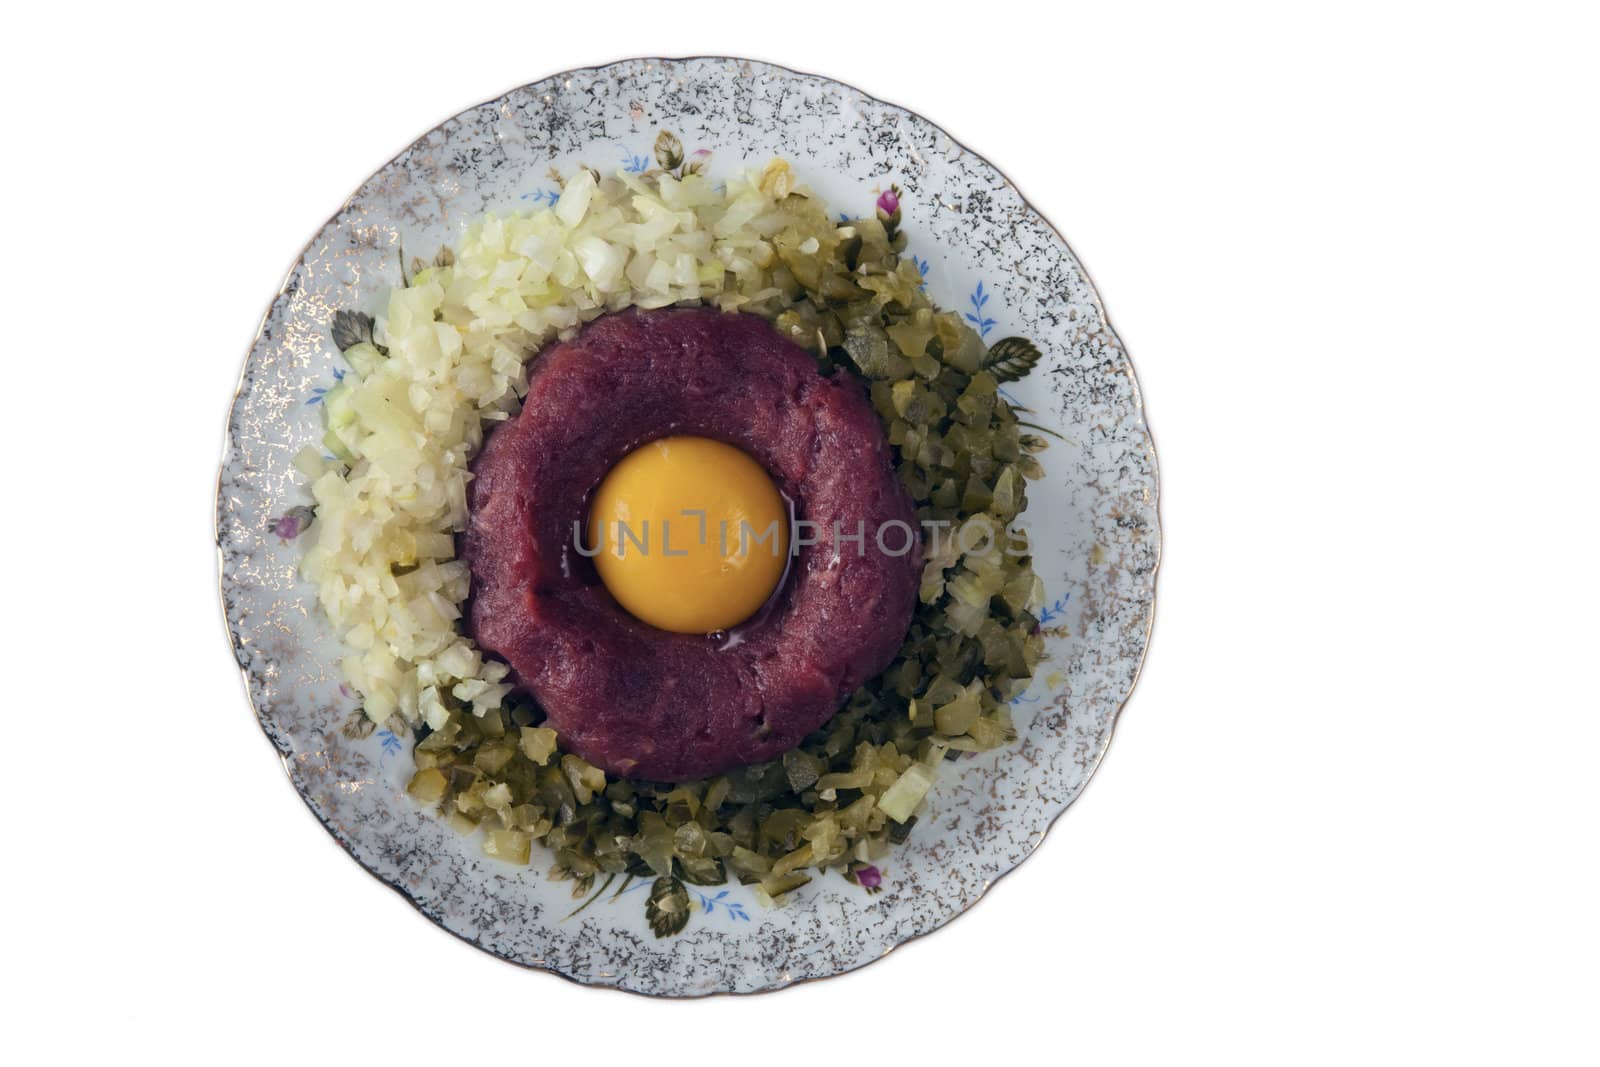 Tatar - raw beef with onions, pickles, yolk and spices.